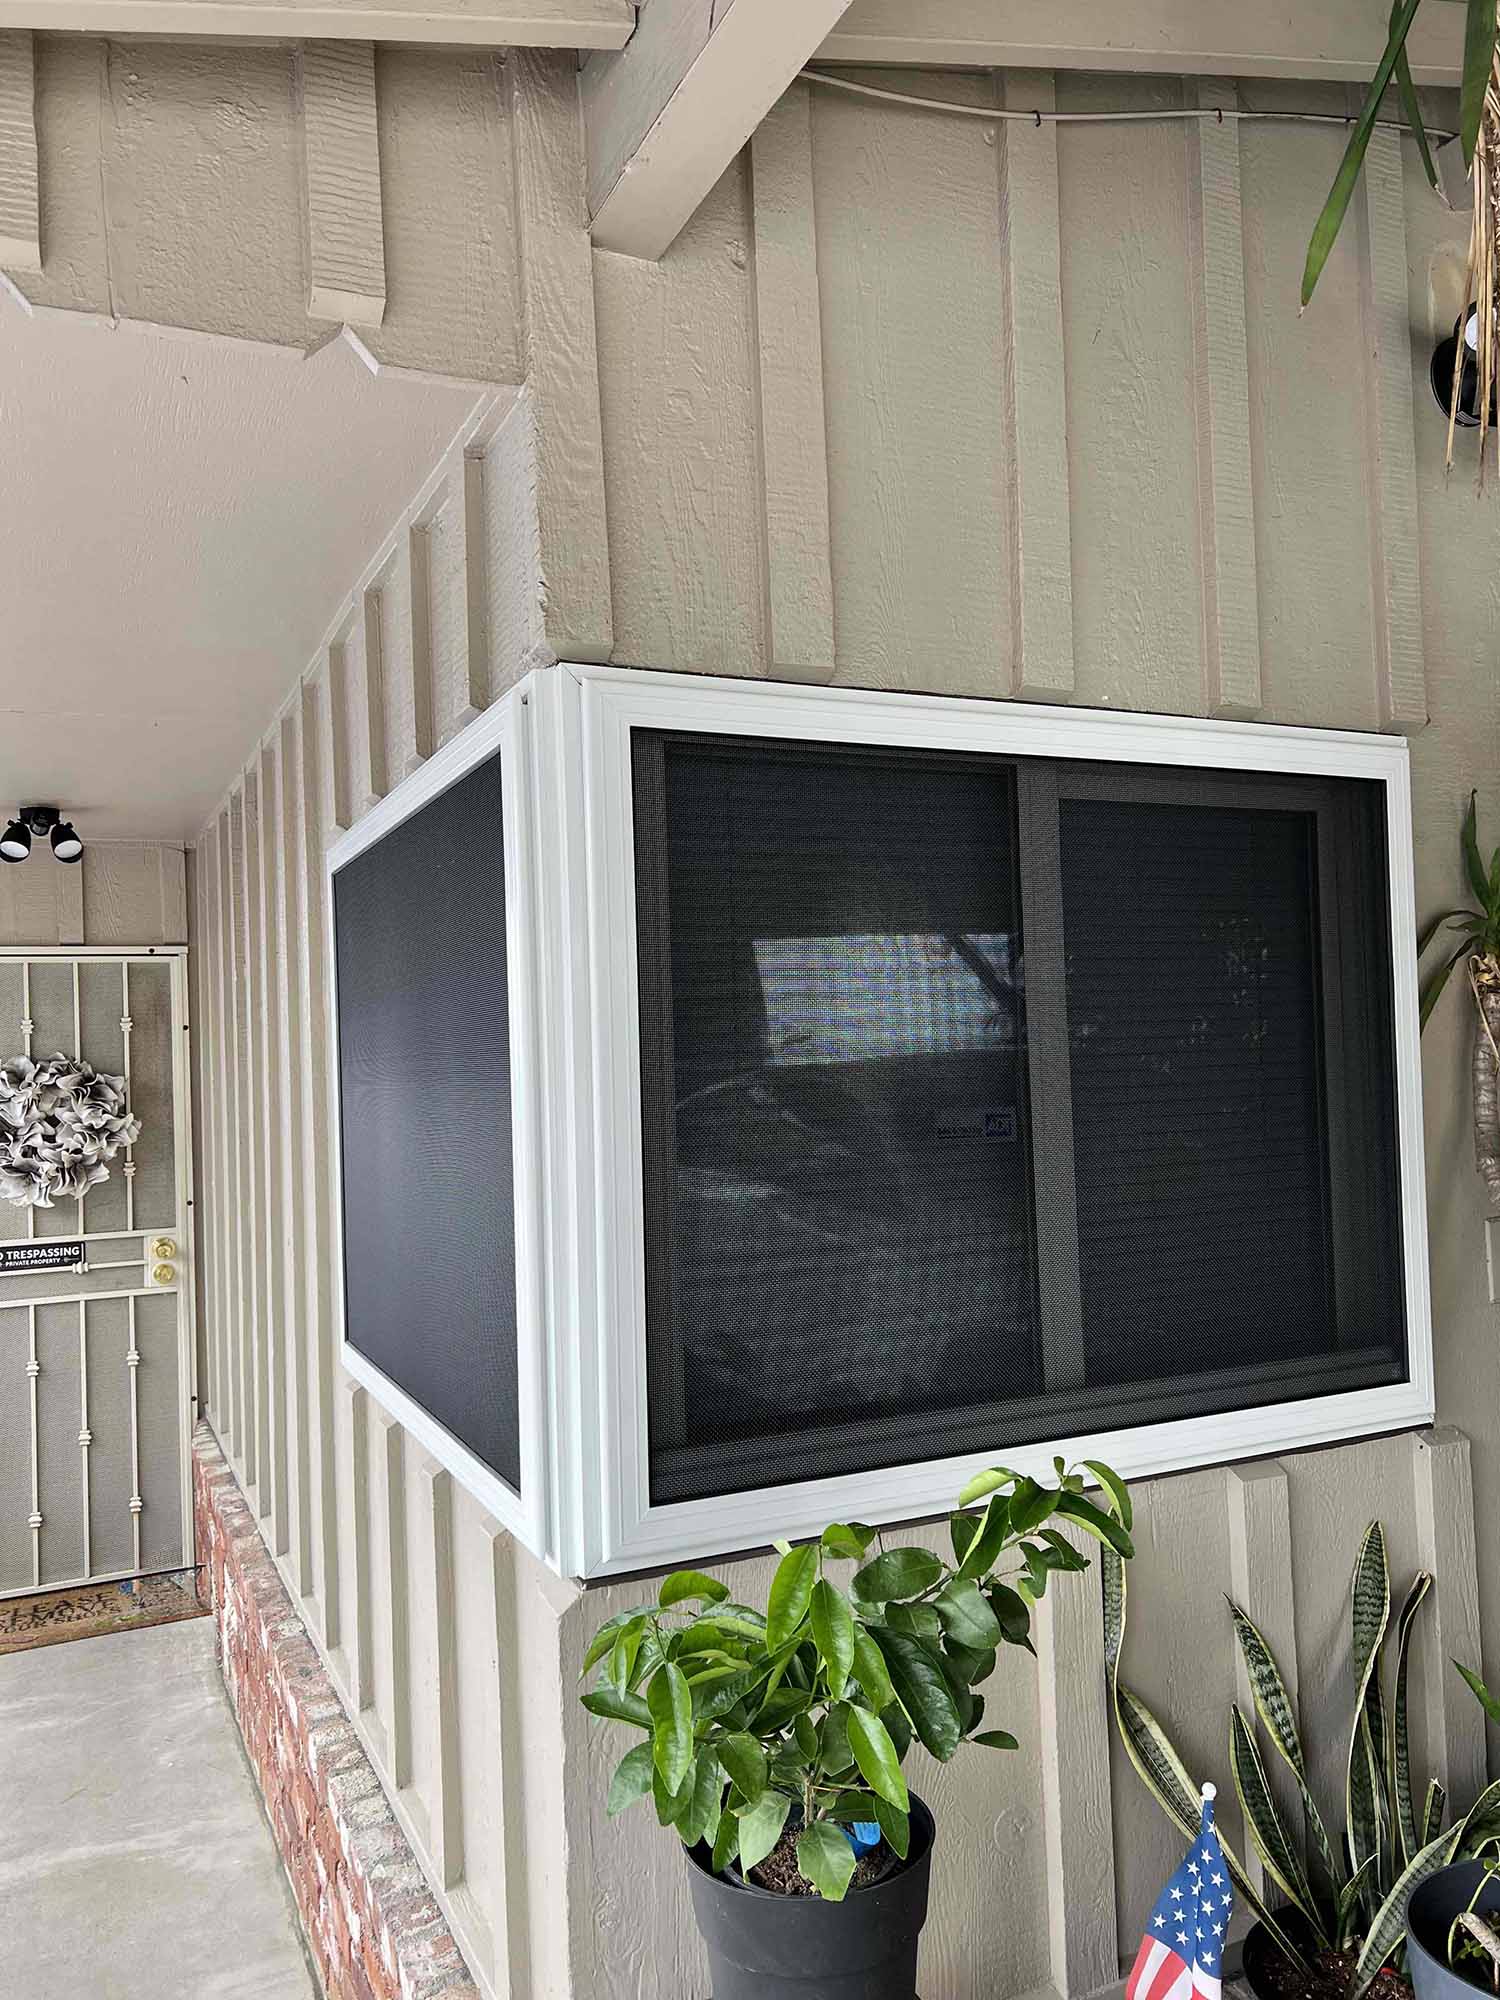 Add Crimsafe Security Screens to Your San Leandro Home. Installed by ClimatePro.